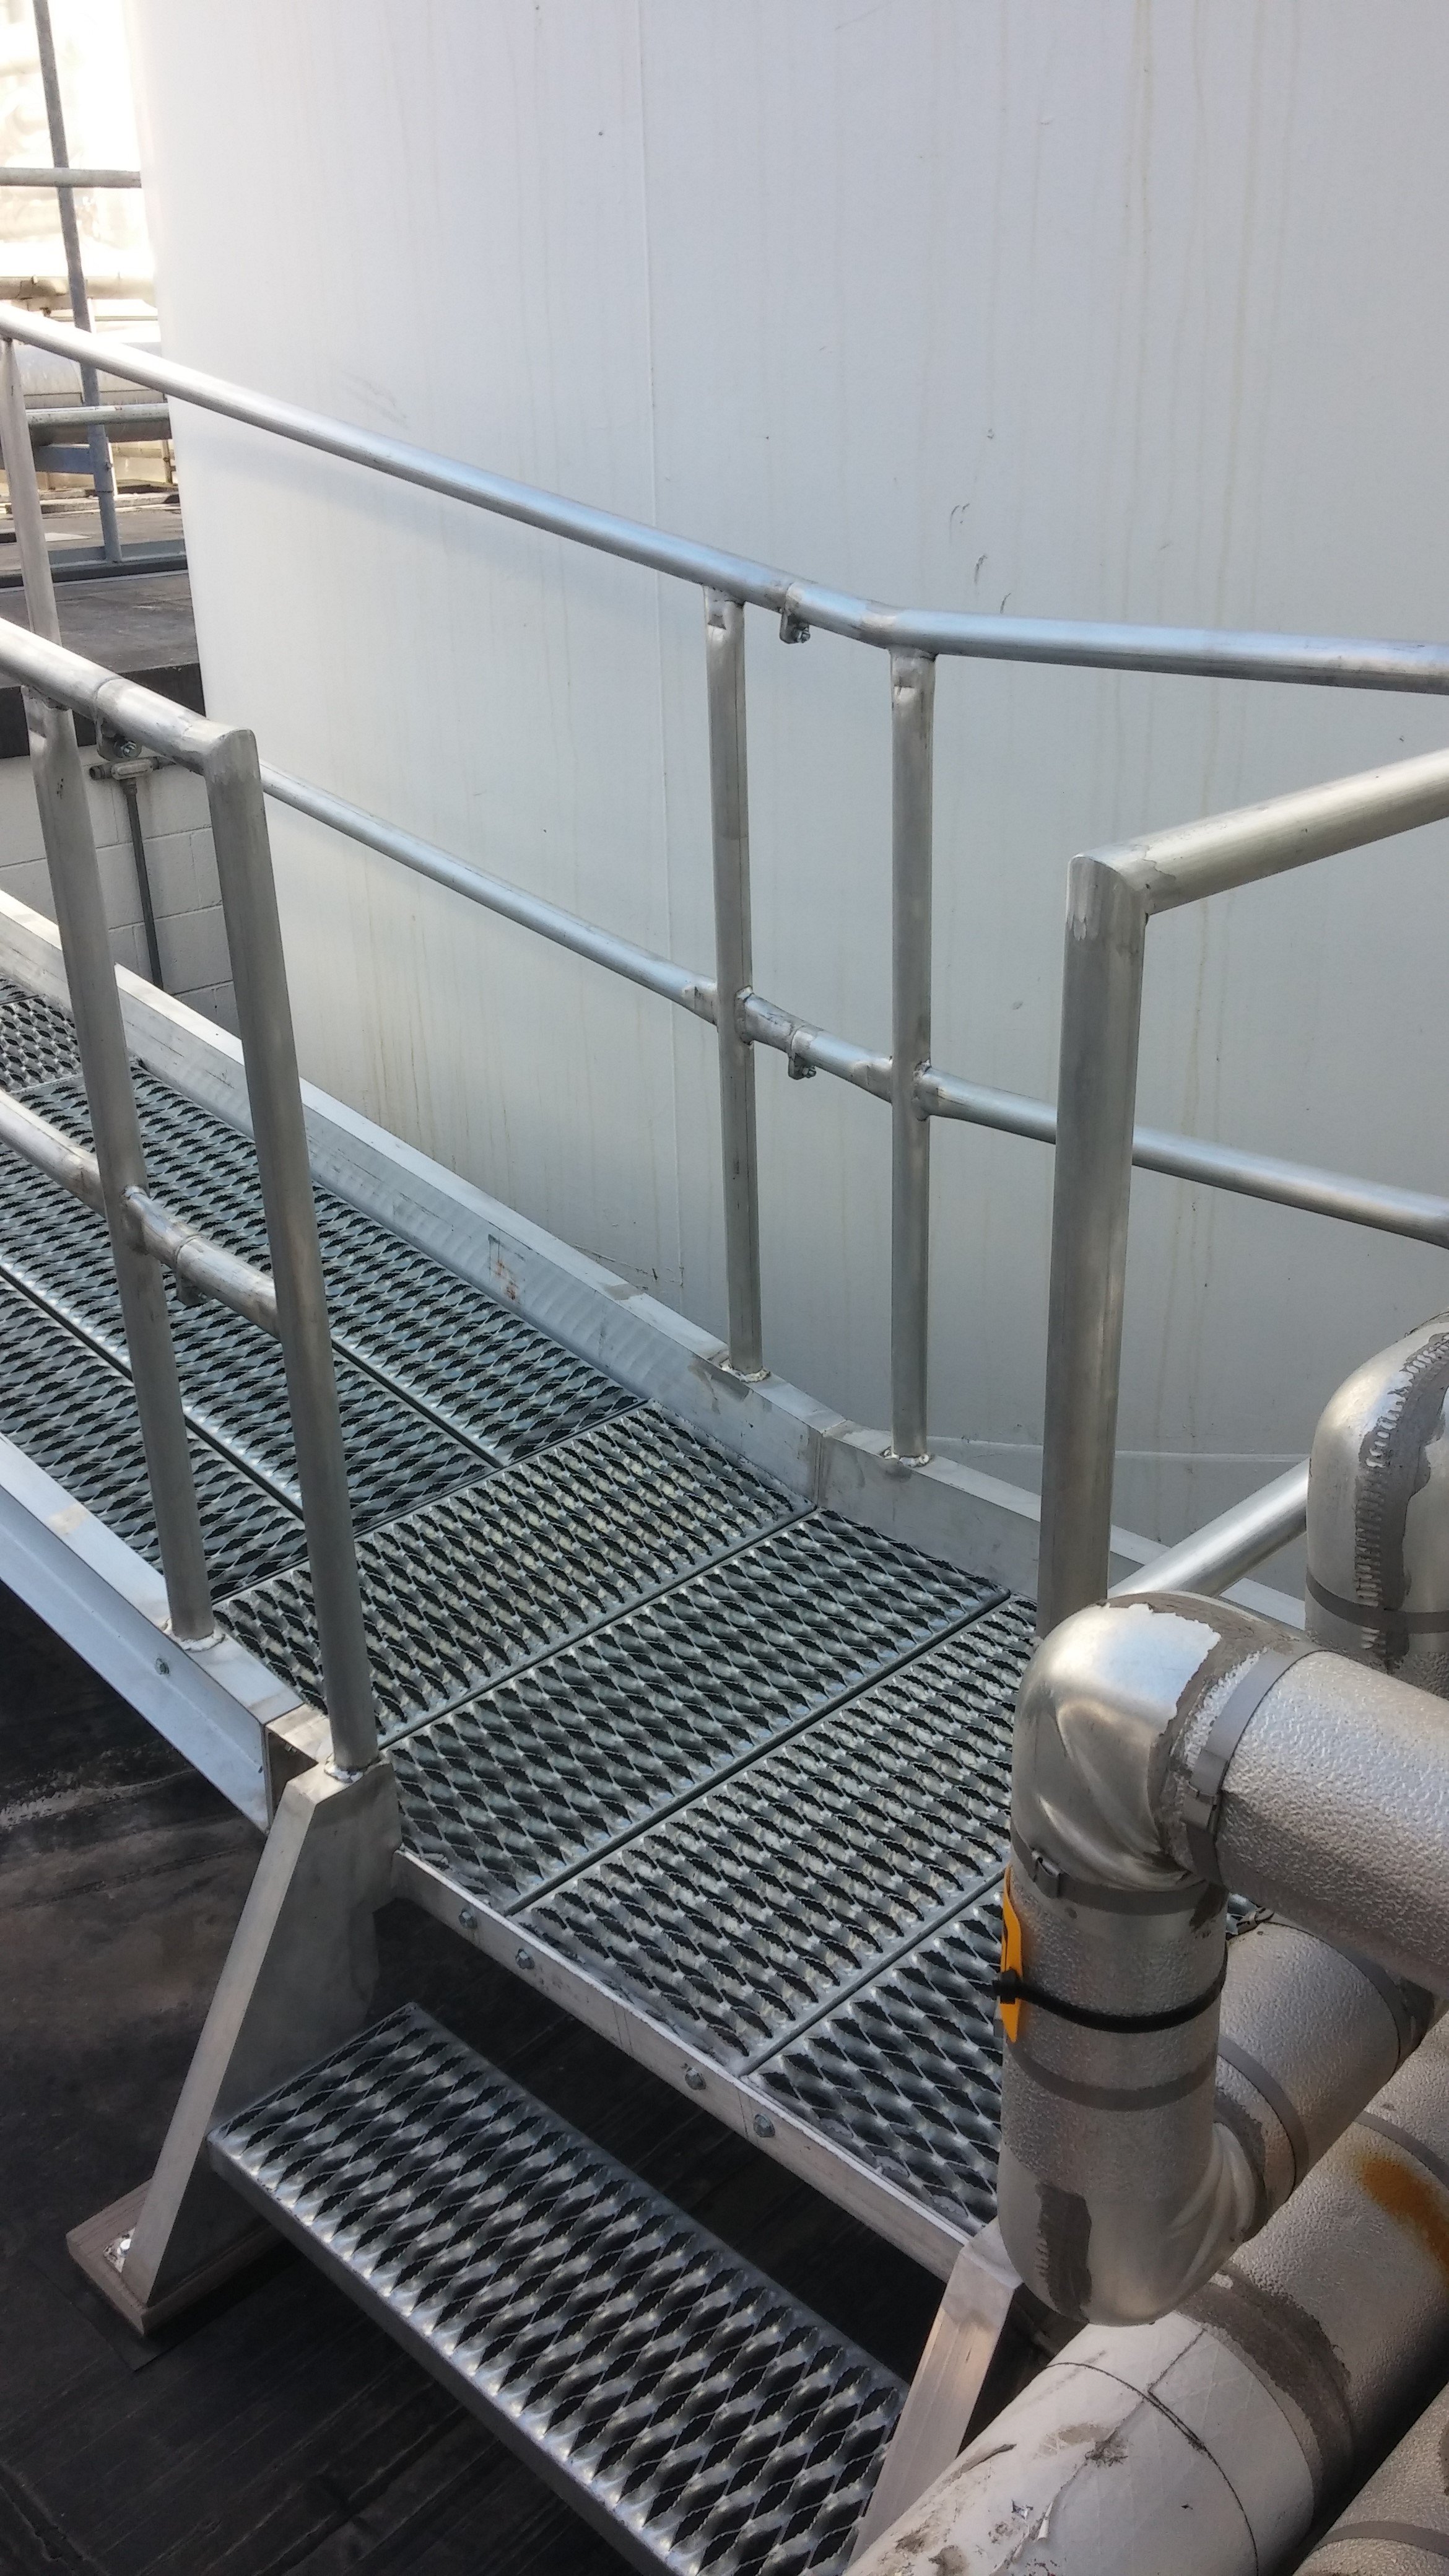 (10b) - Ramp fabricated out of aluminum channel & handrail, bolted assembly for easy installation & removal.jpg